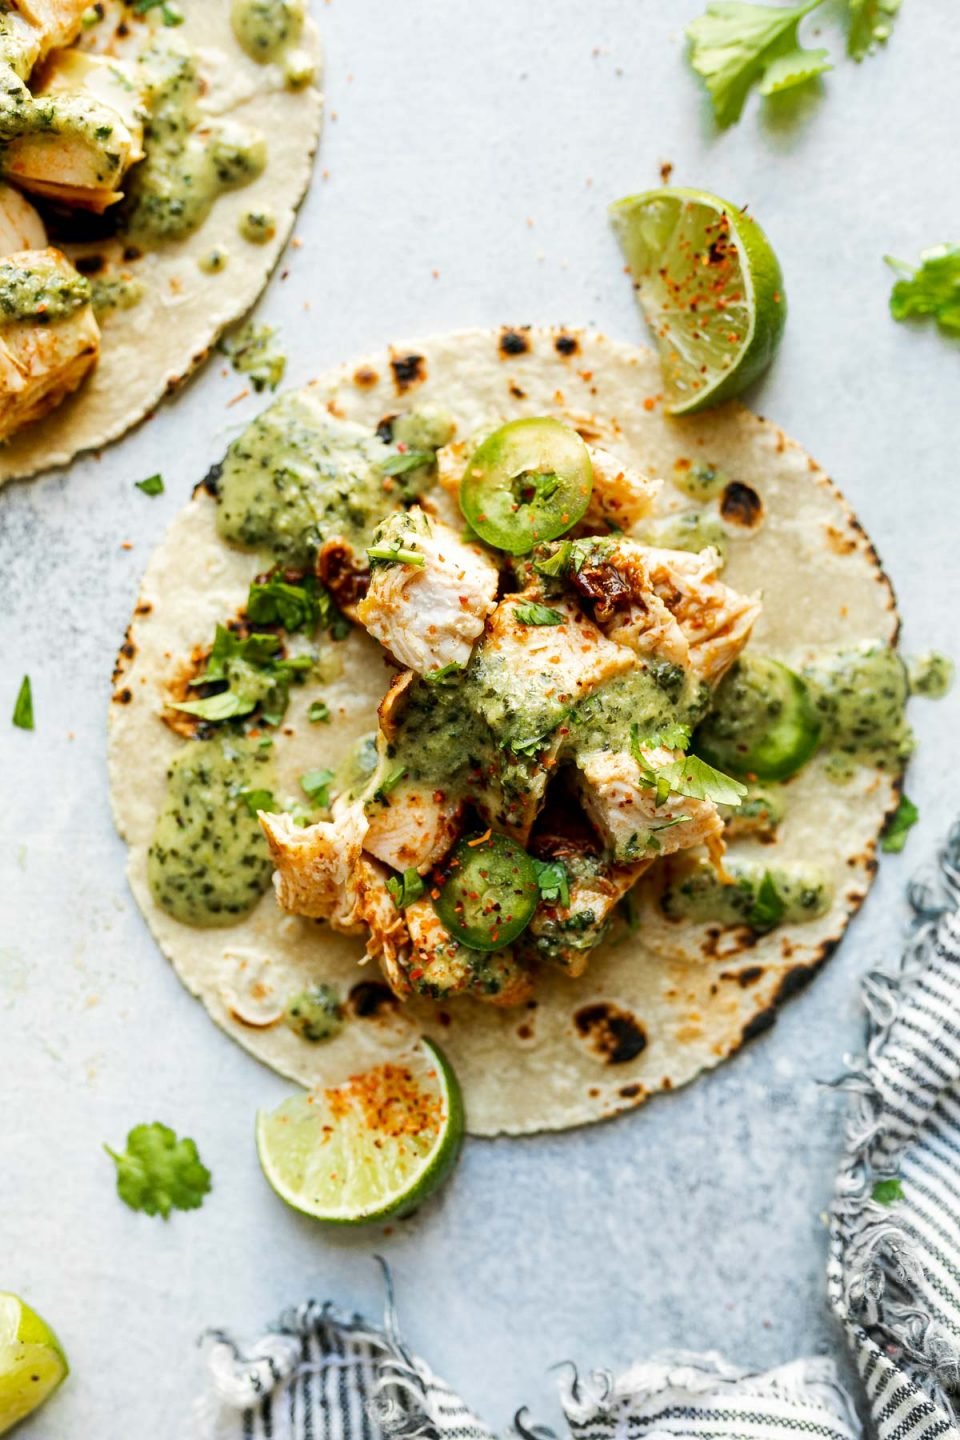 2 grilled chicken tacos, topped with creamy jalapeno sauce & sliced jalapeno. The tacos sit atop a light blue surface, surrounded by cilantro leaves, Tajin-dusted lime wedges, & a gray & white striped linen napkin.